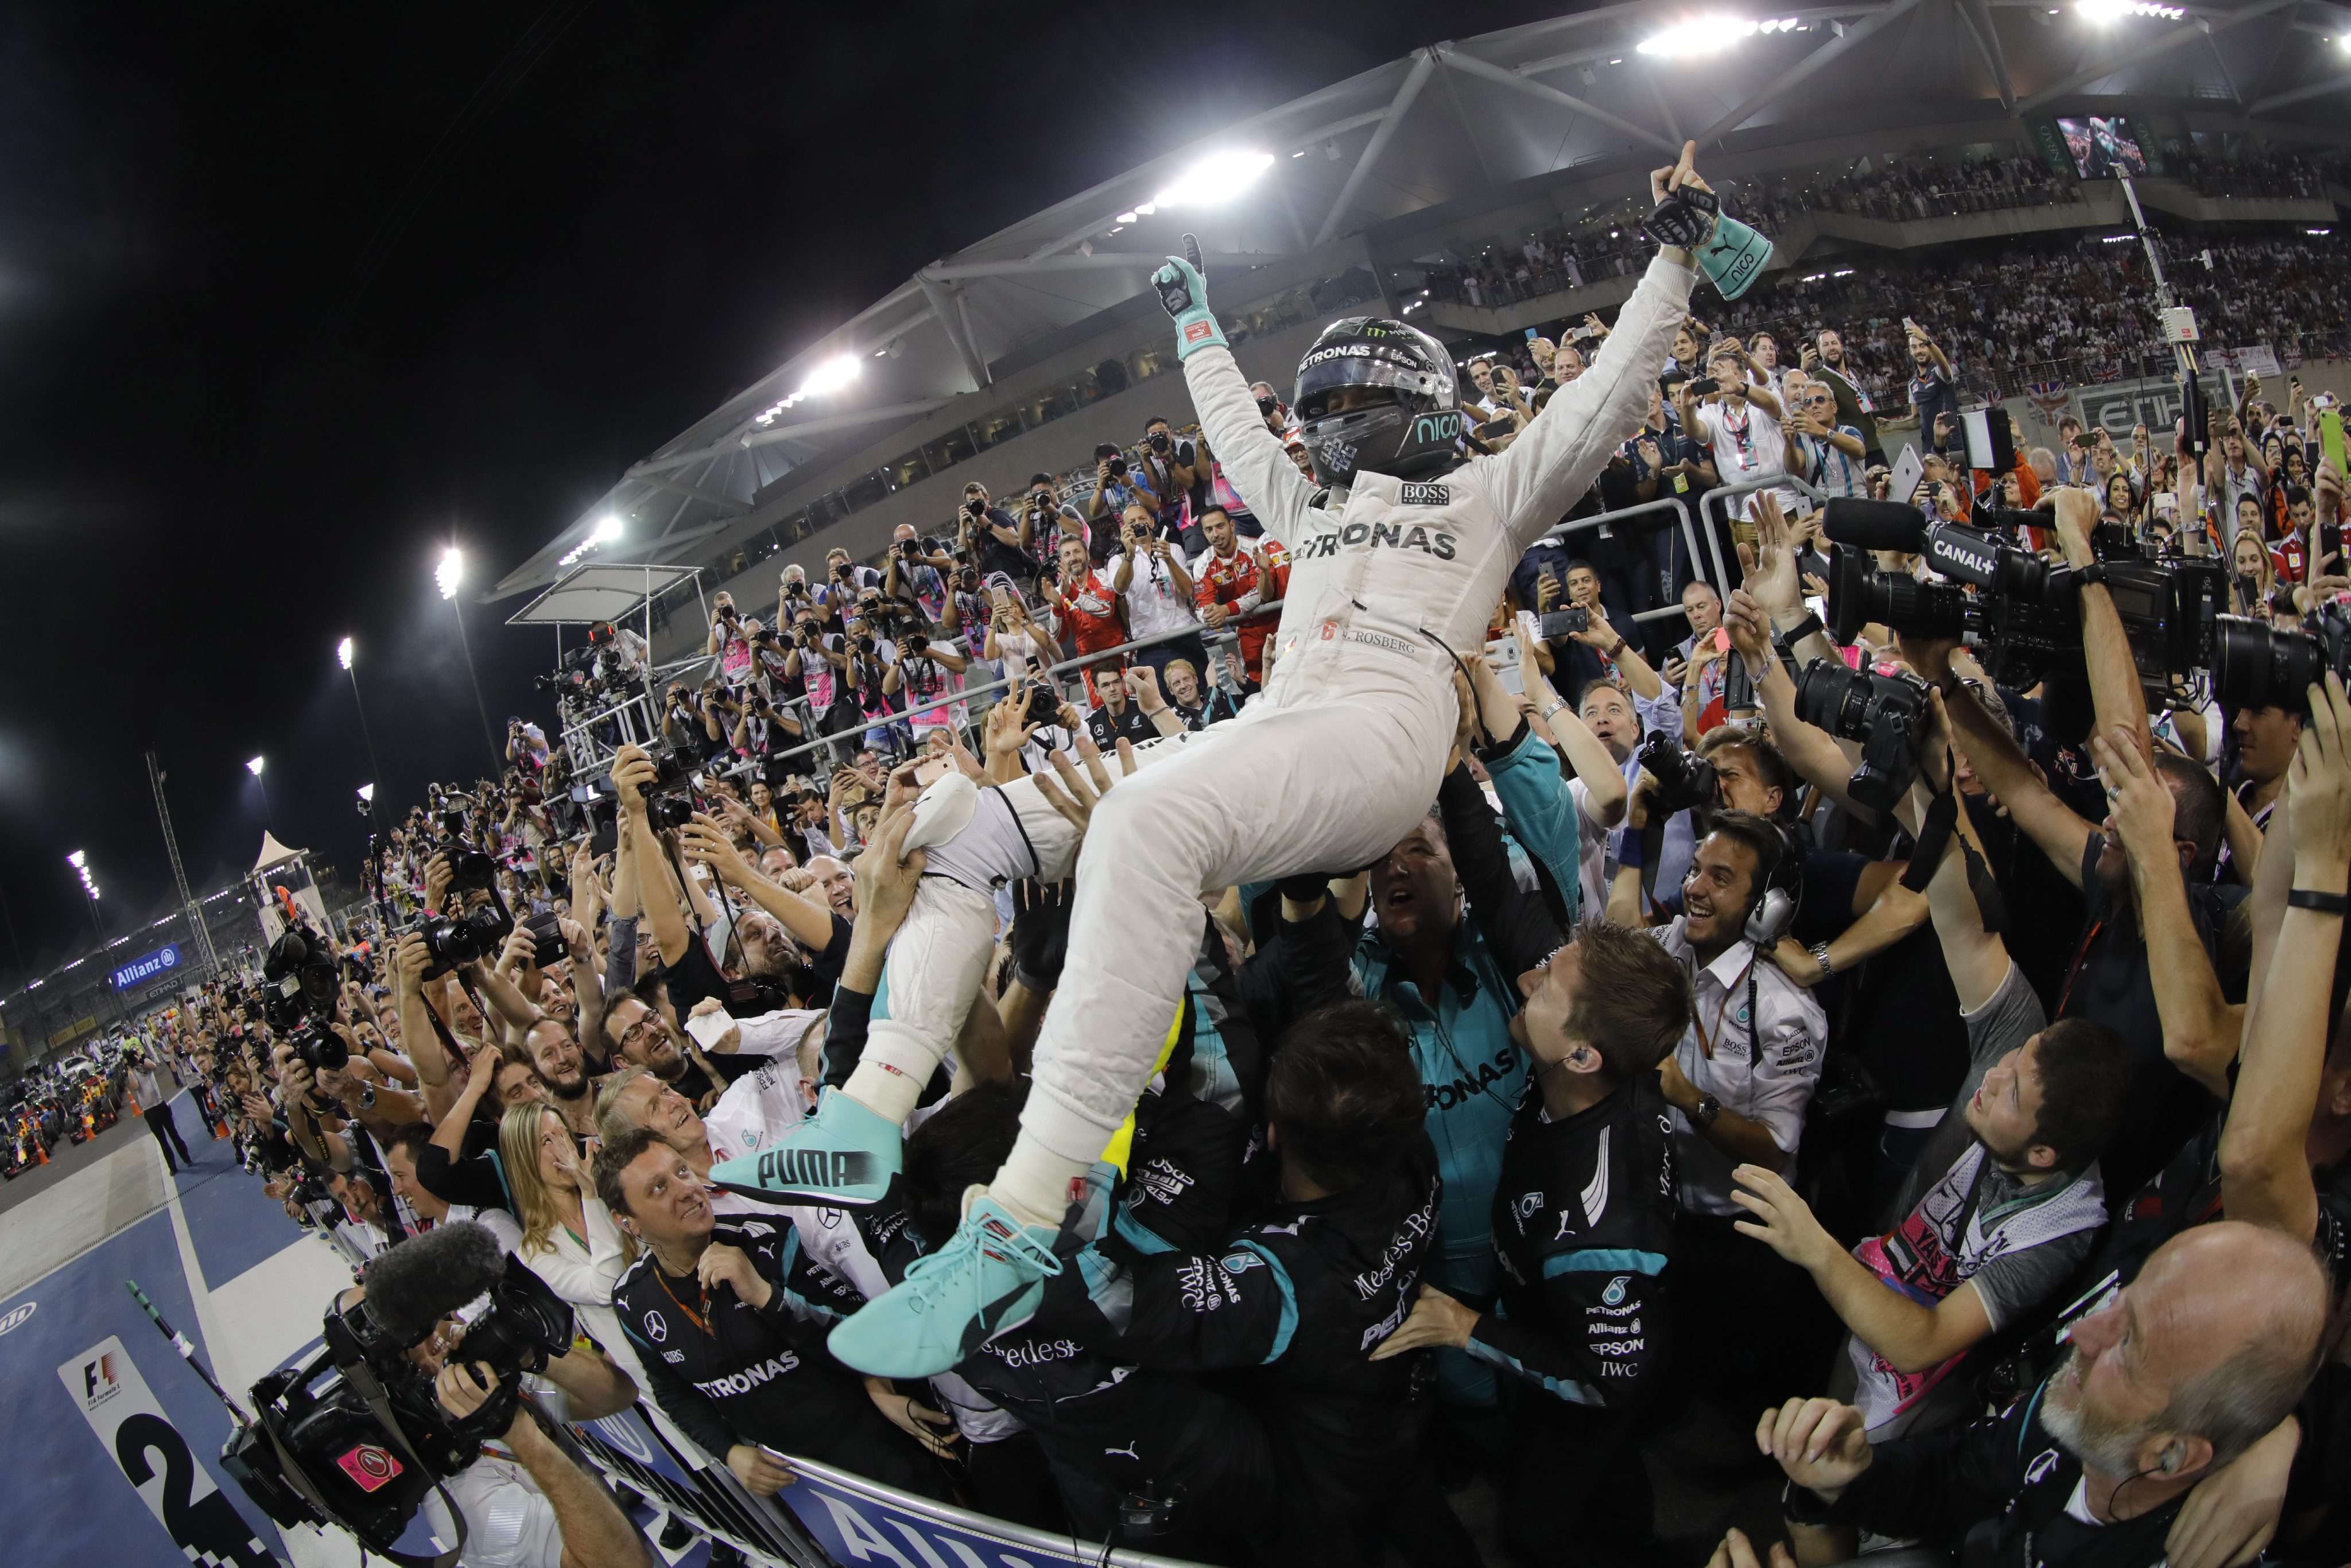 German Formula One driver Nico Rosberg celebrates his world title with his crew after finishing second in the Abu Dhabi Grand Prix in his Mercedes. Photo: EPA